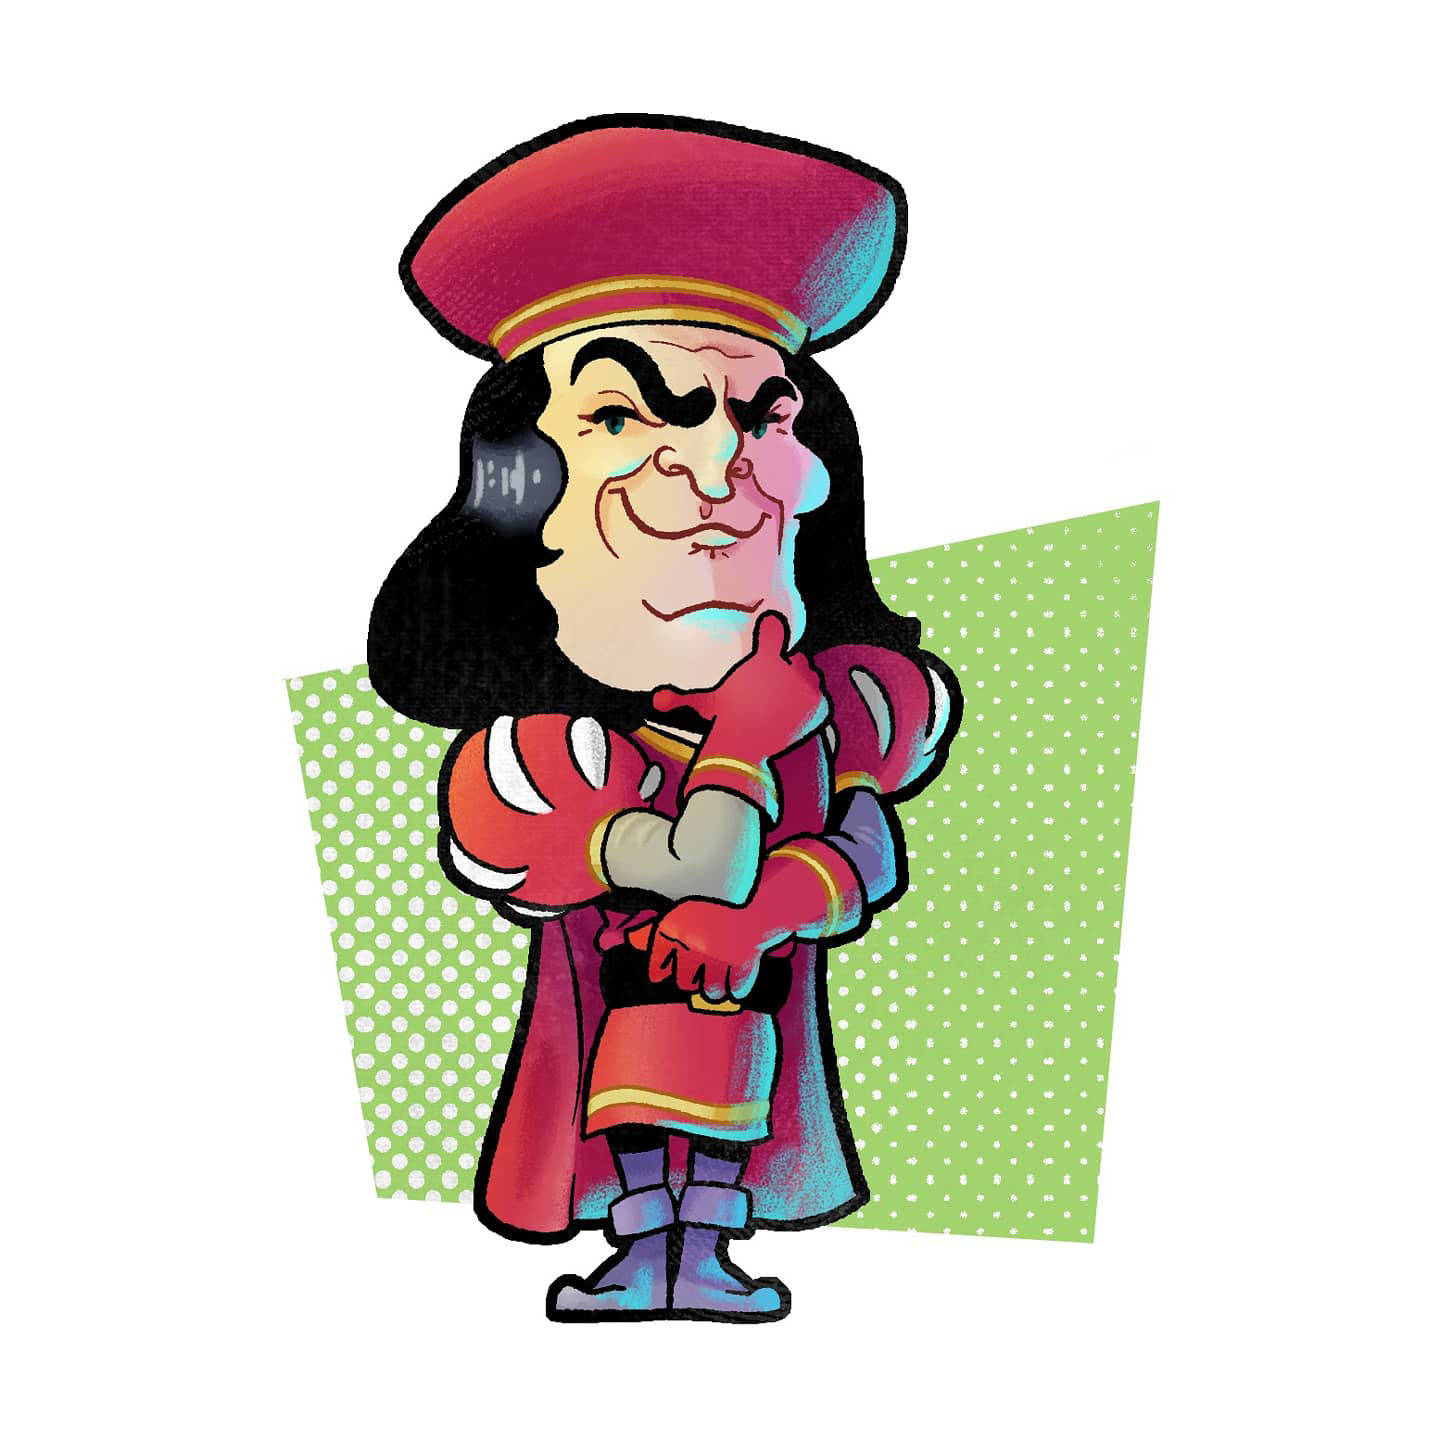 Lord Farquaad Caricature Background